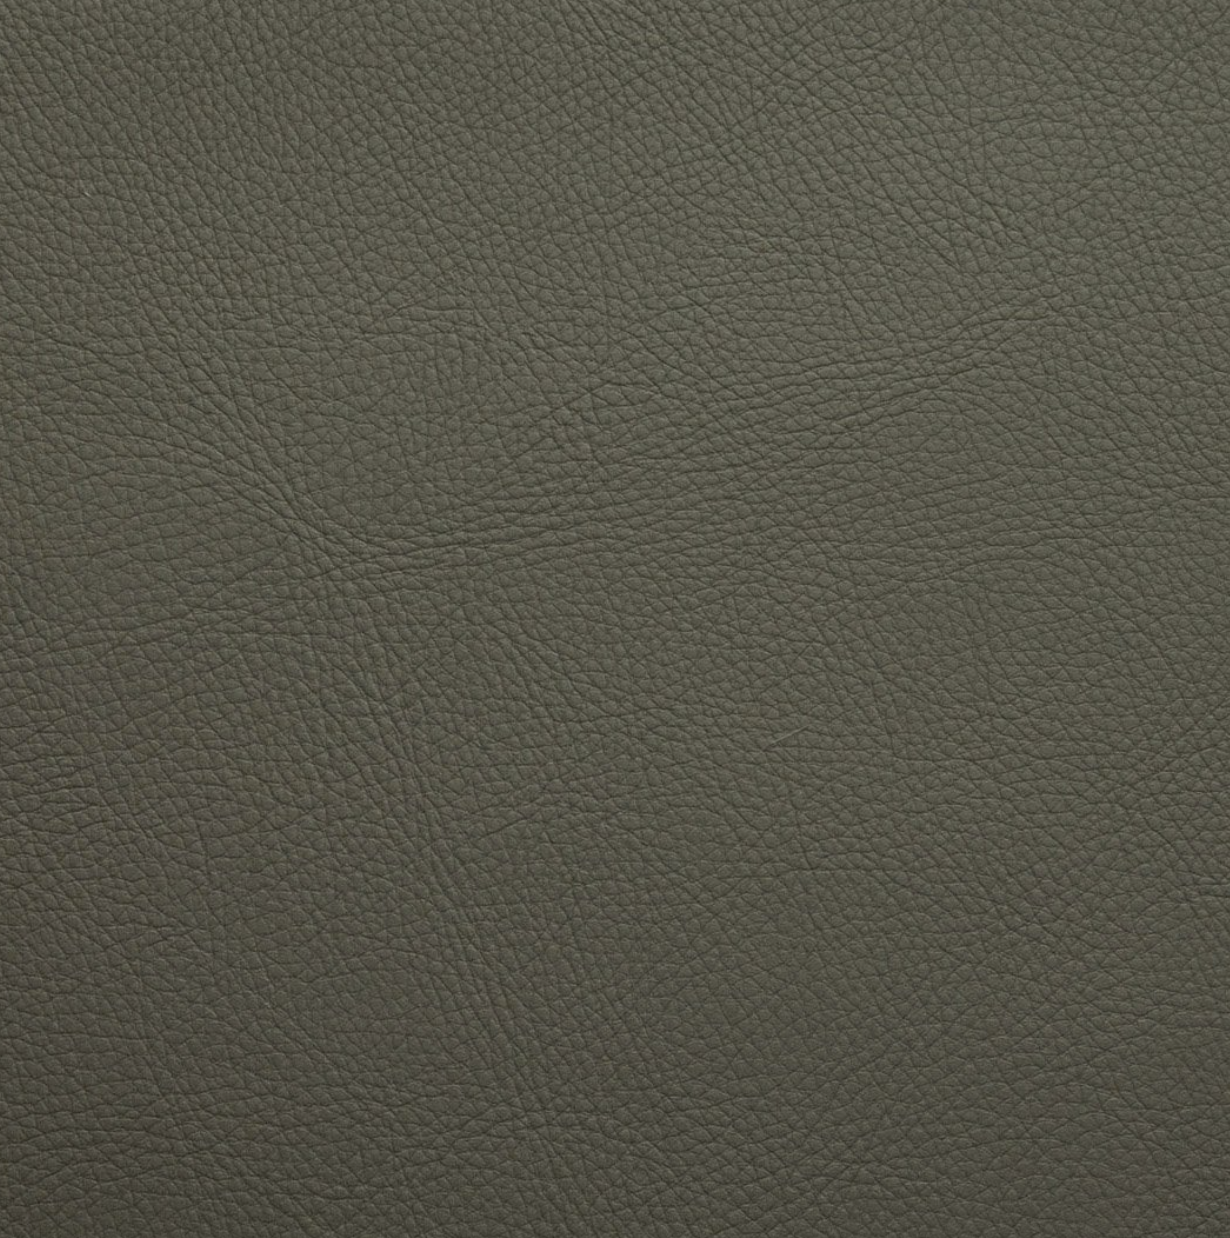 Viva is one of our faux leather options